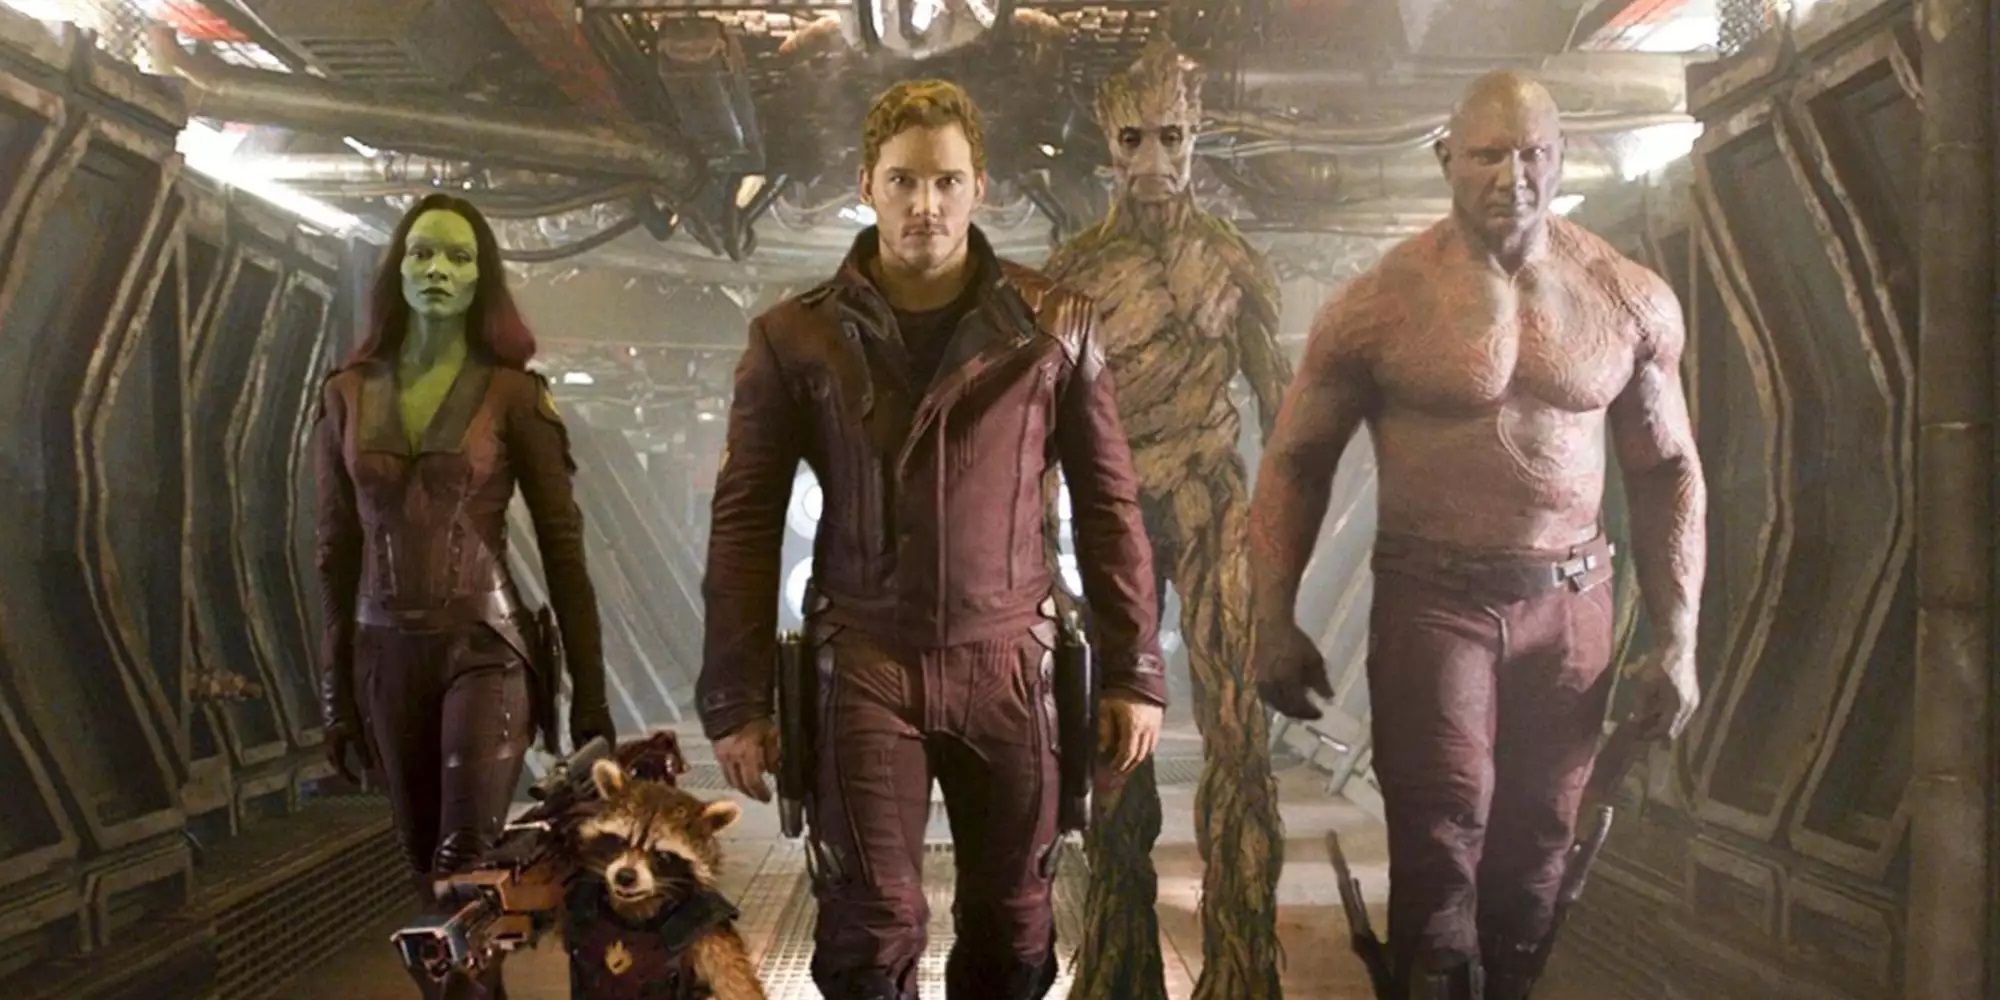 The Guardians of the Galaxy marching into action